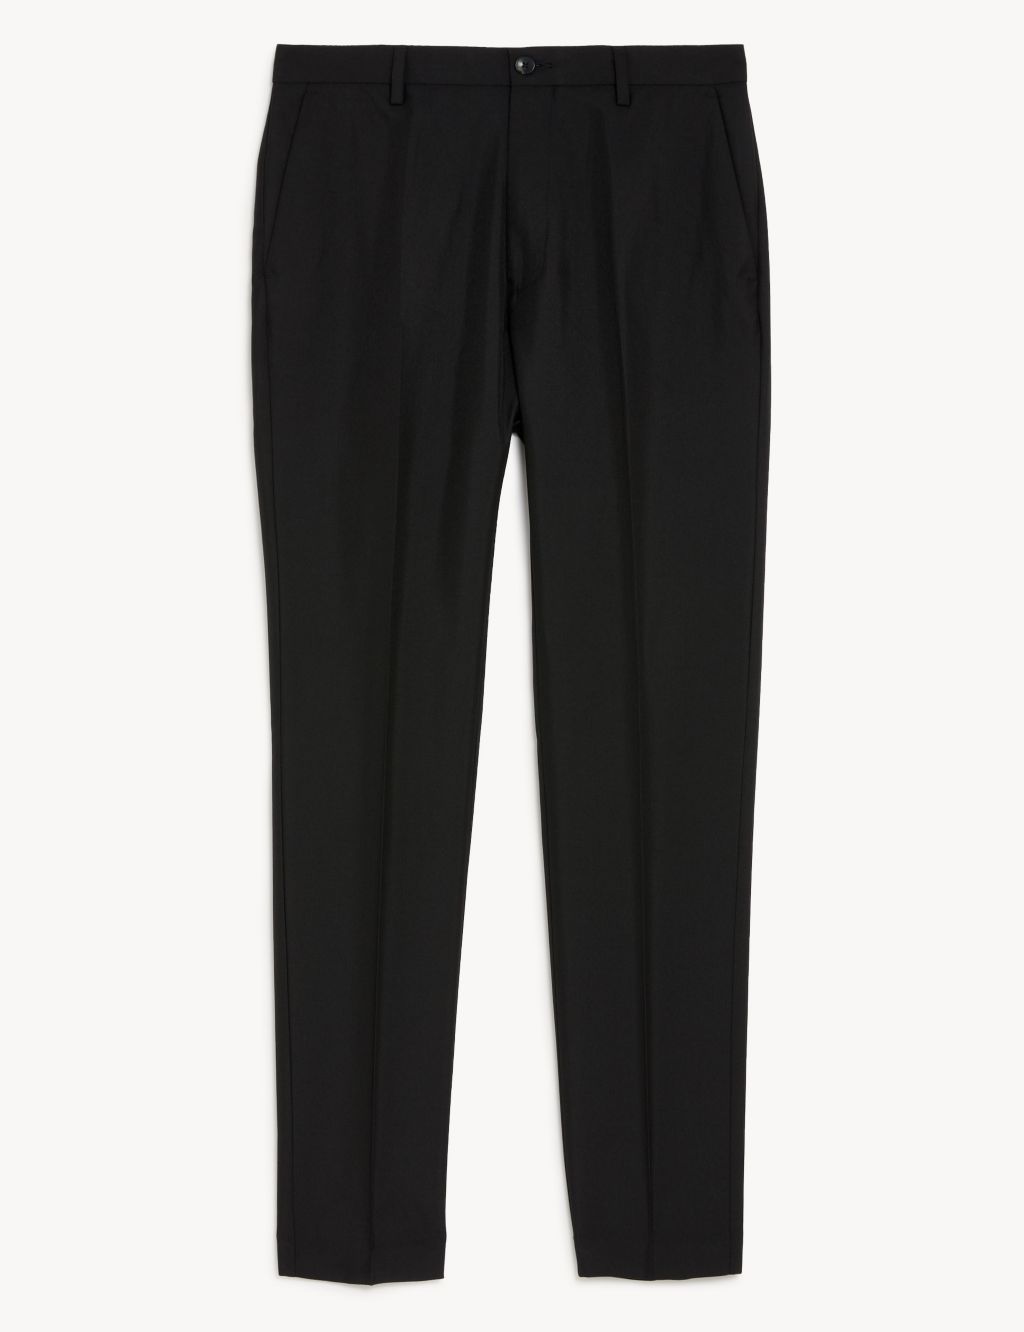 Skinny Fit Trousers image 7